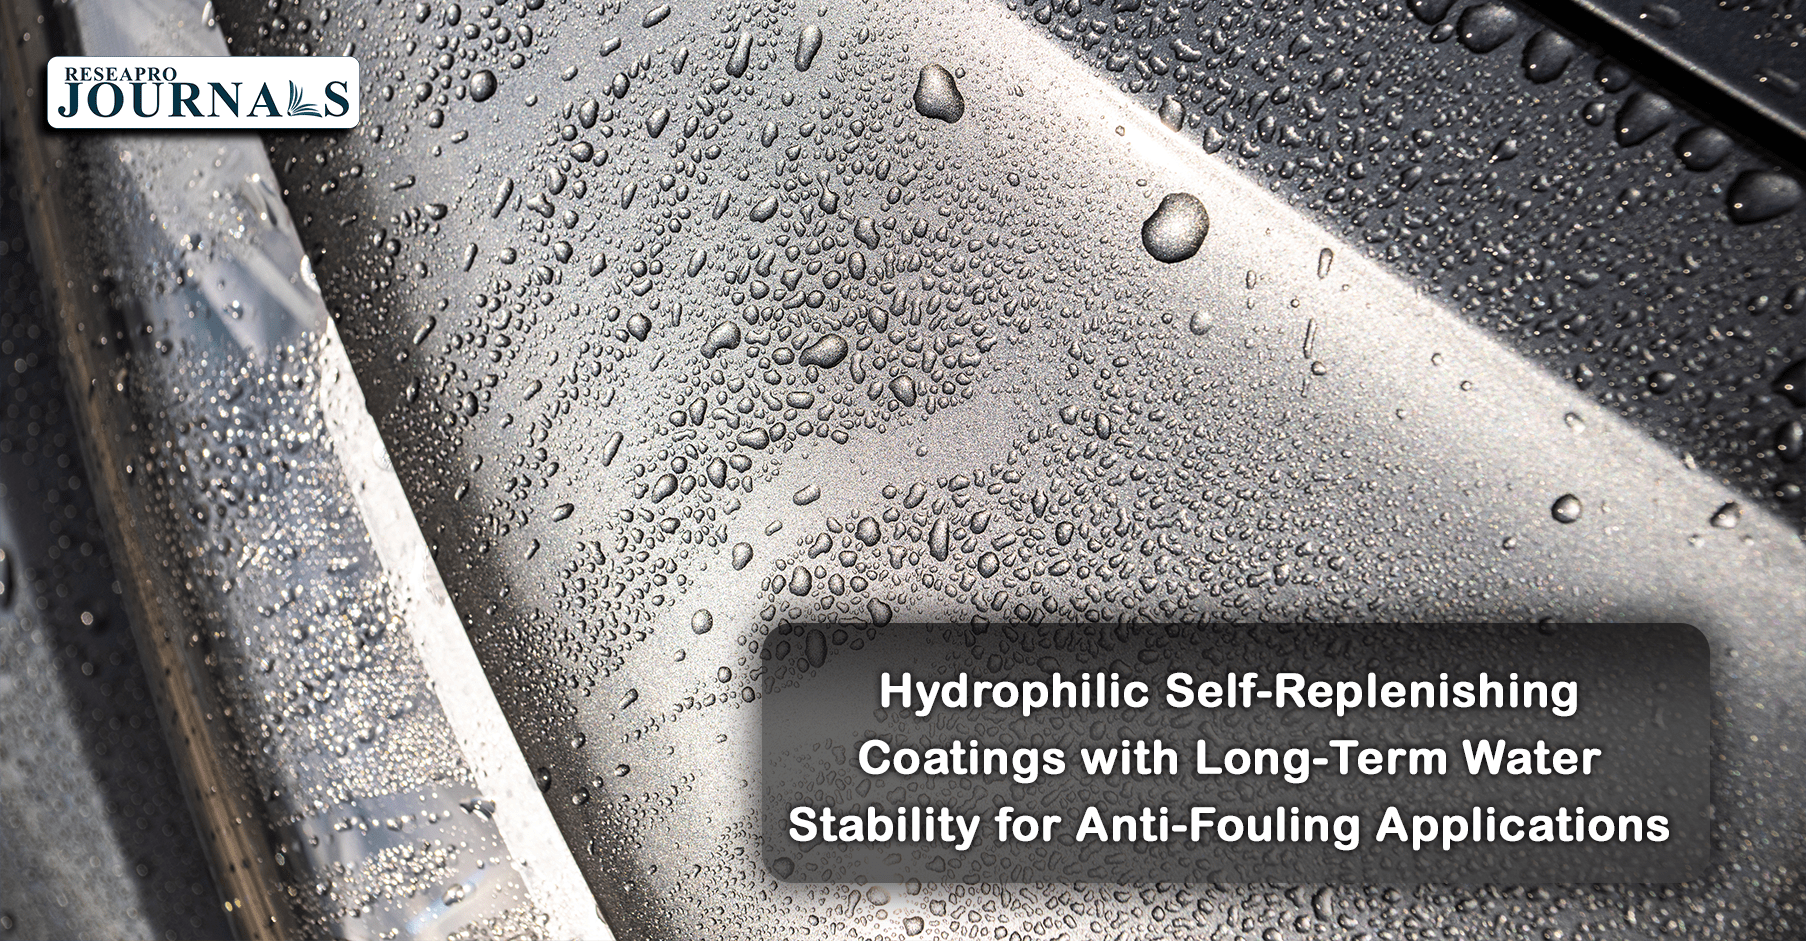 Hydrophilic Self-Replenishing Coatings with Long-Term Water Stability for Anti-Fouling Applications